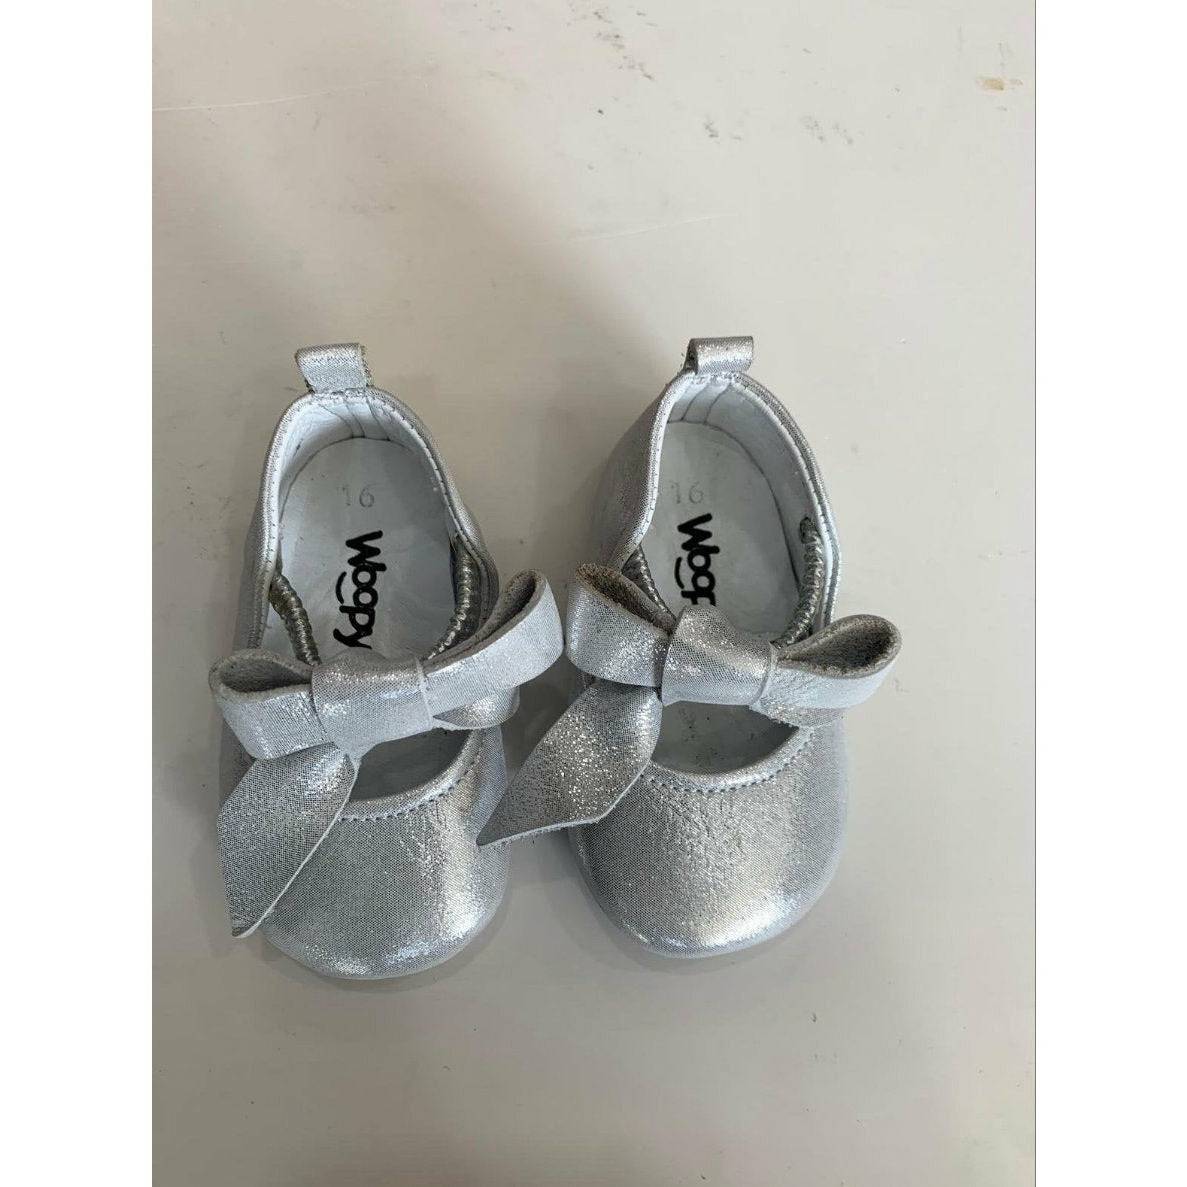 ROSEBUD LEATHER SHOES - SILVER